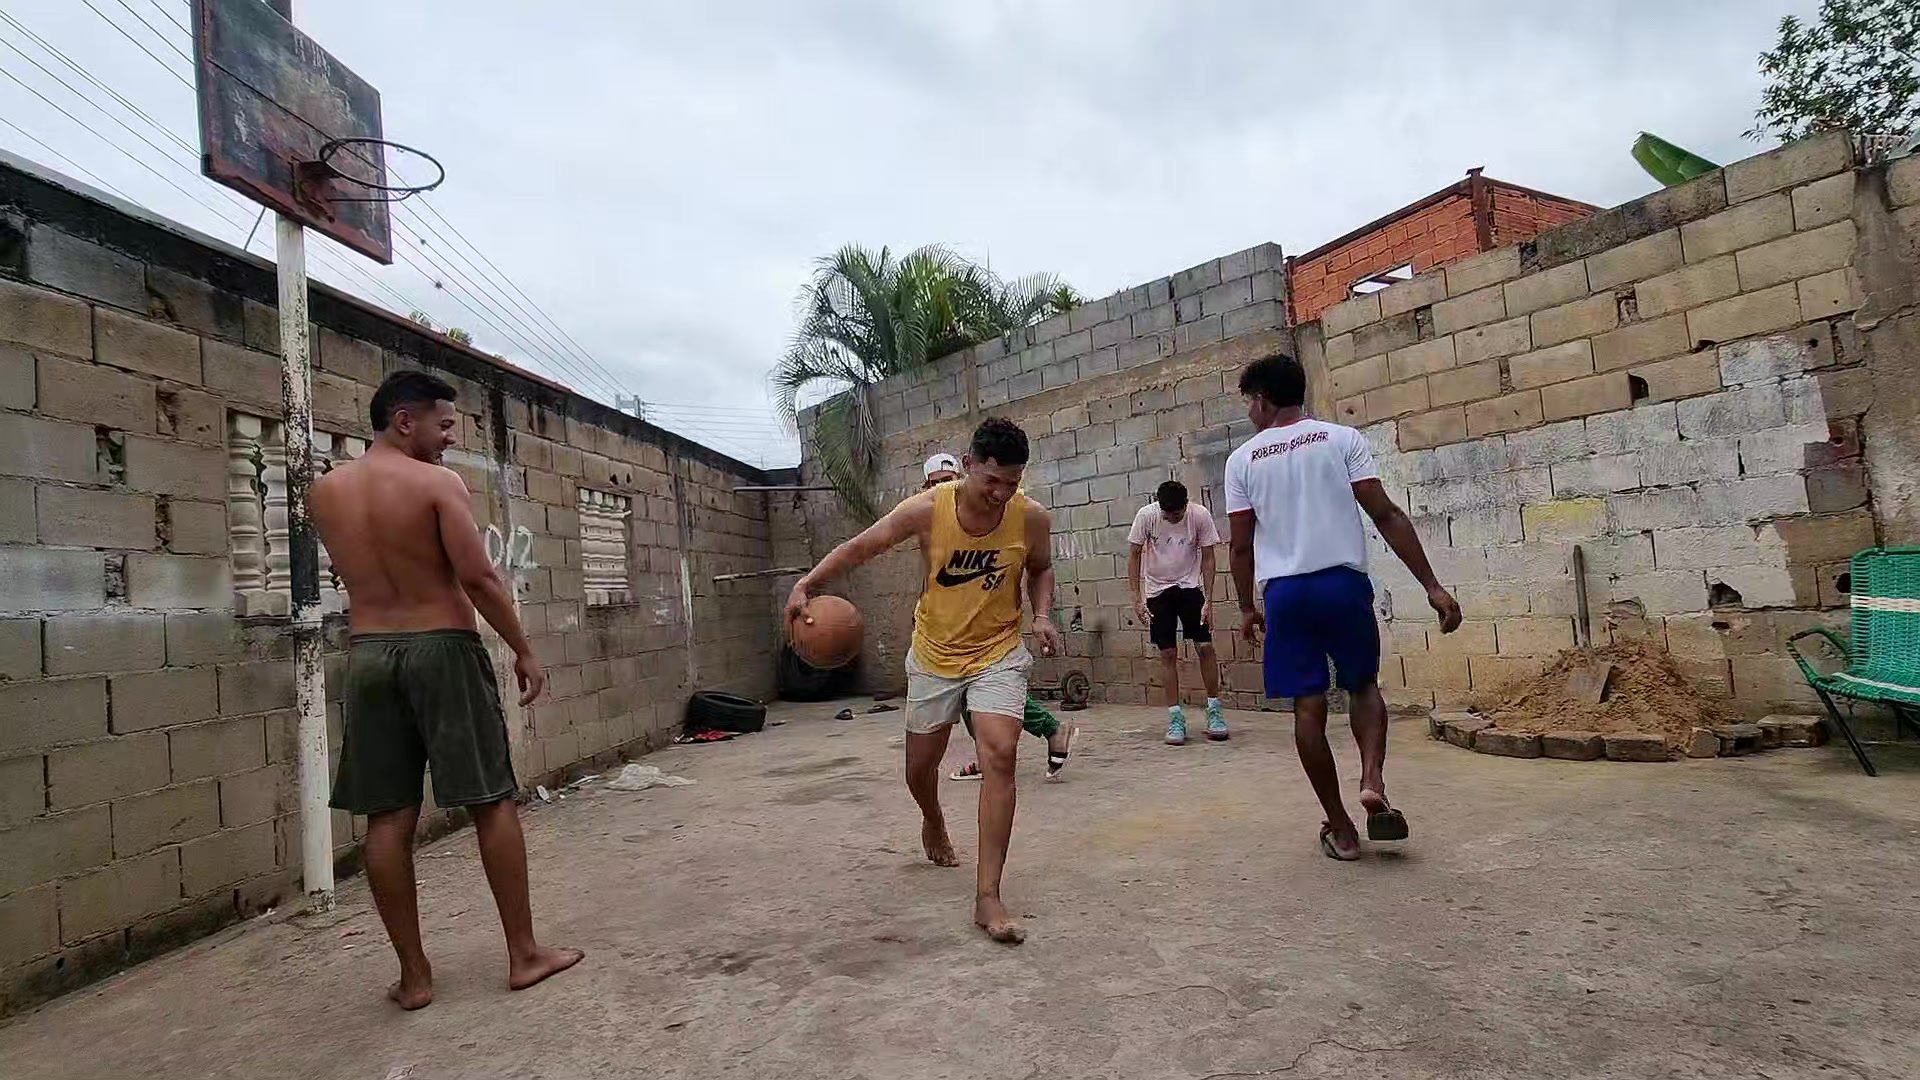 my current sex slaves playing basketball